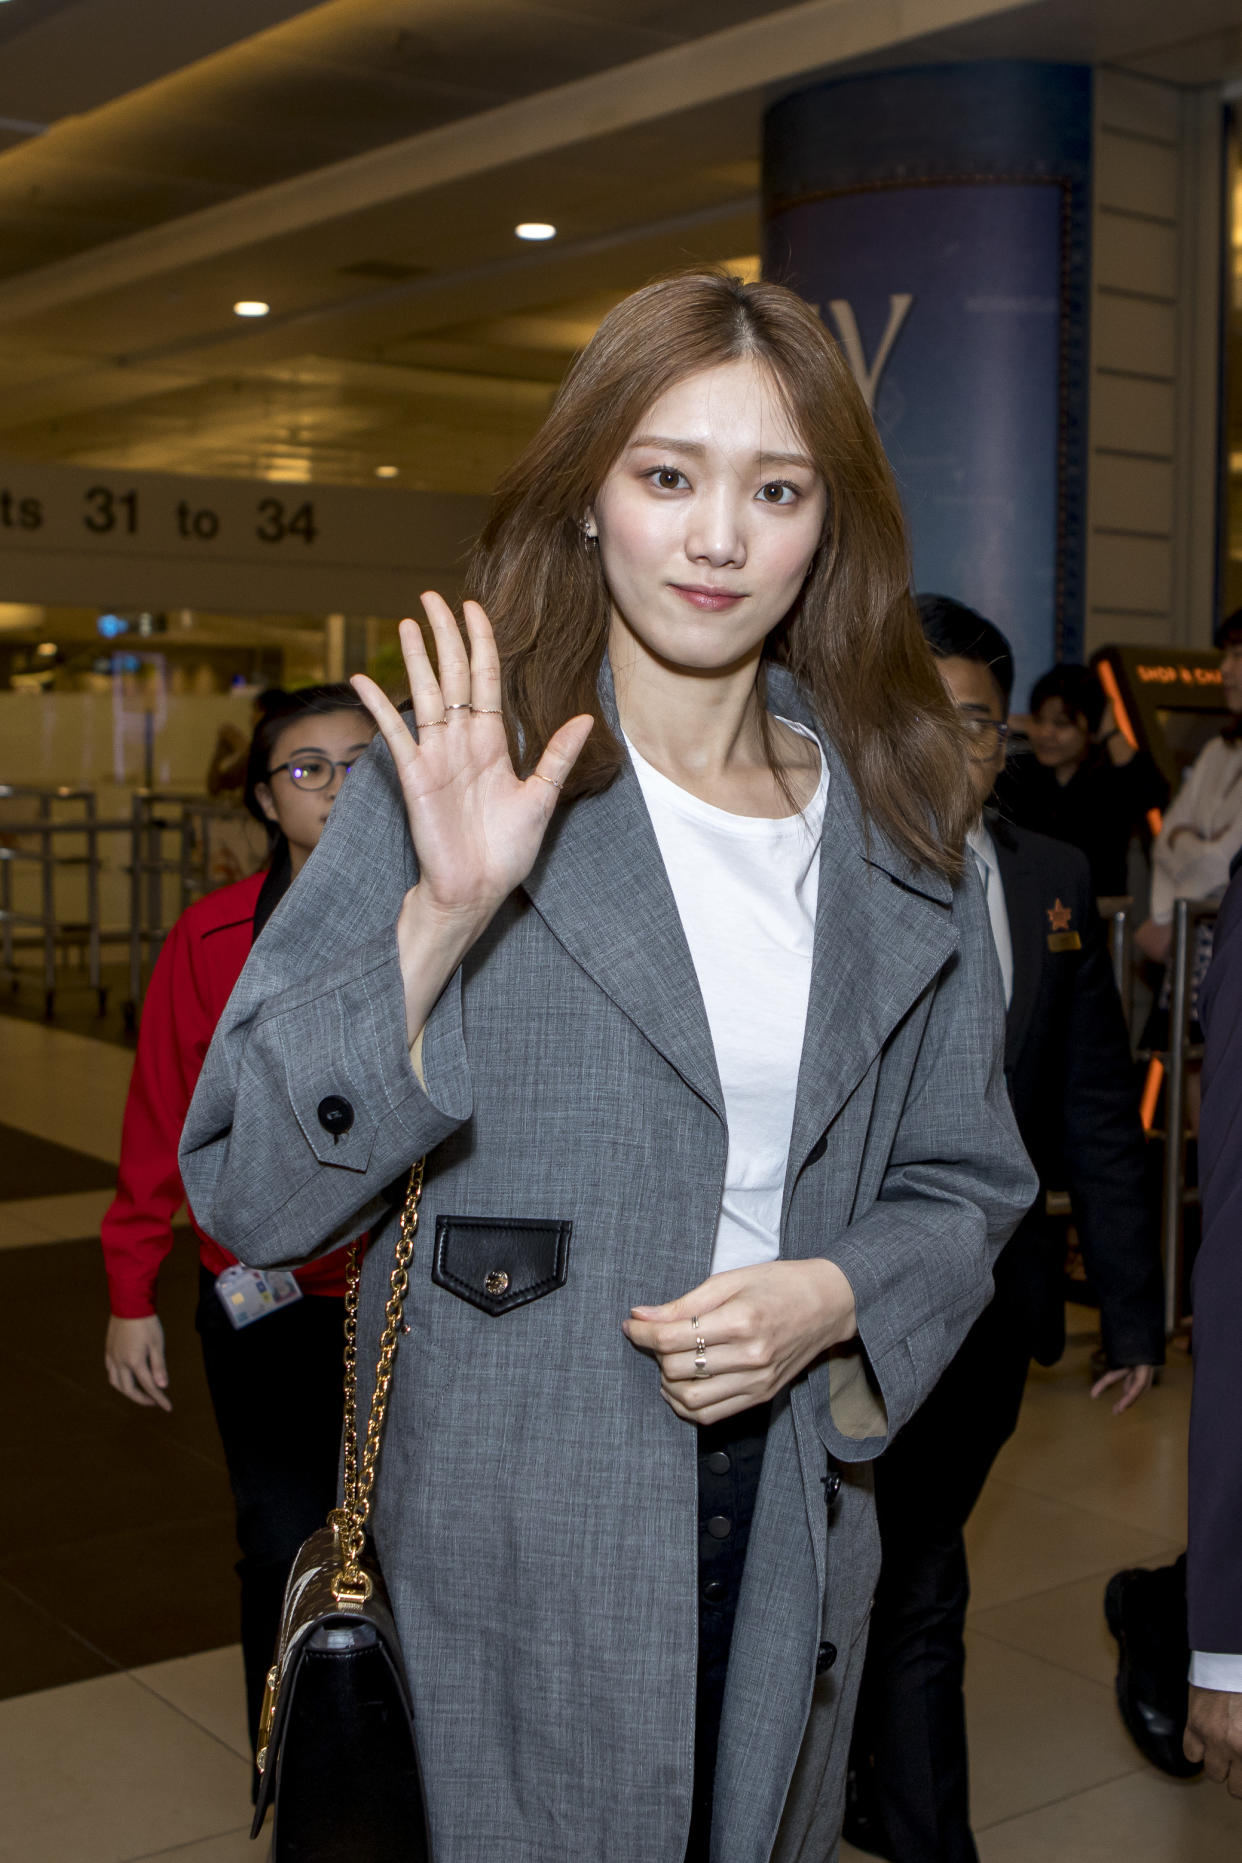 South Korean actress Lee Sung-kyung in Singapore for the opening of Louis Vuitton’s Time Capsule Exhibition. She was seen dressed in the brand’s Fall Winter 2017 Collection. (Photo: Louis Vuitton)